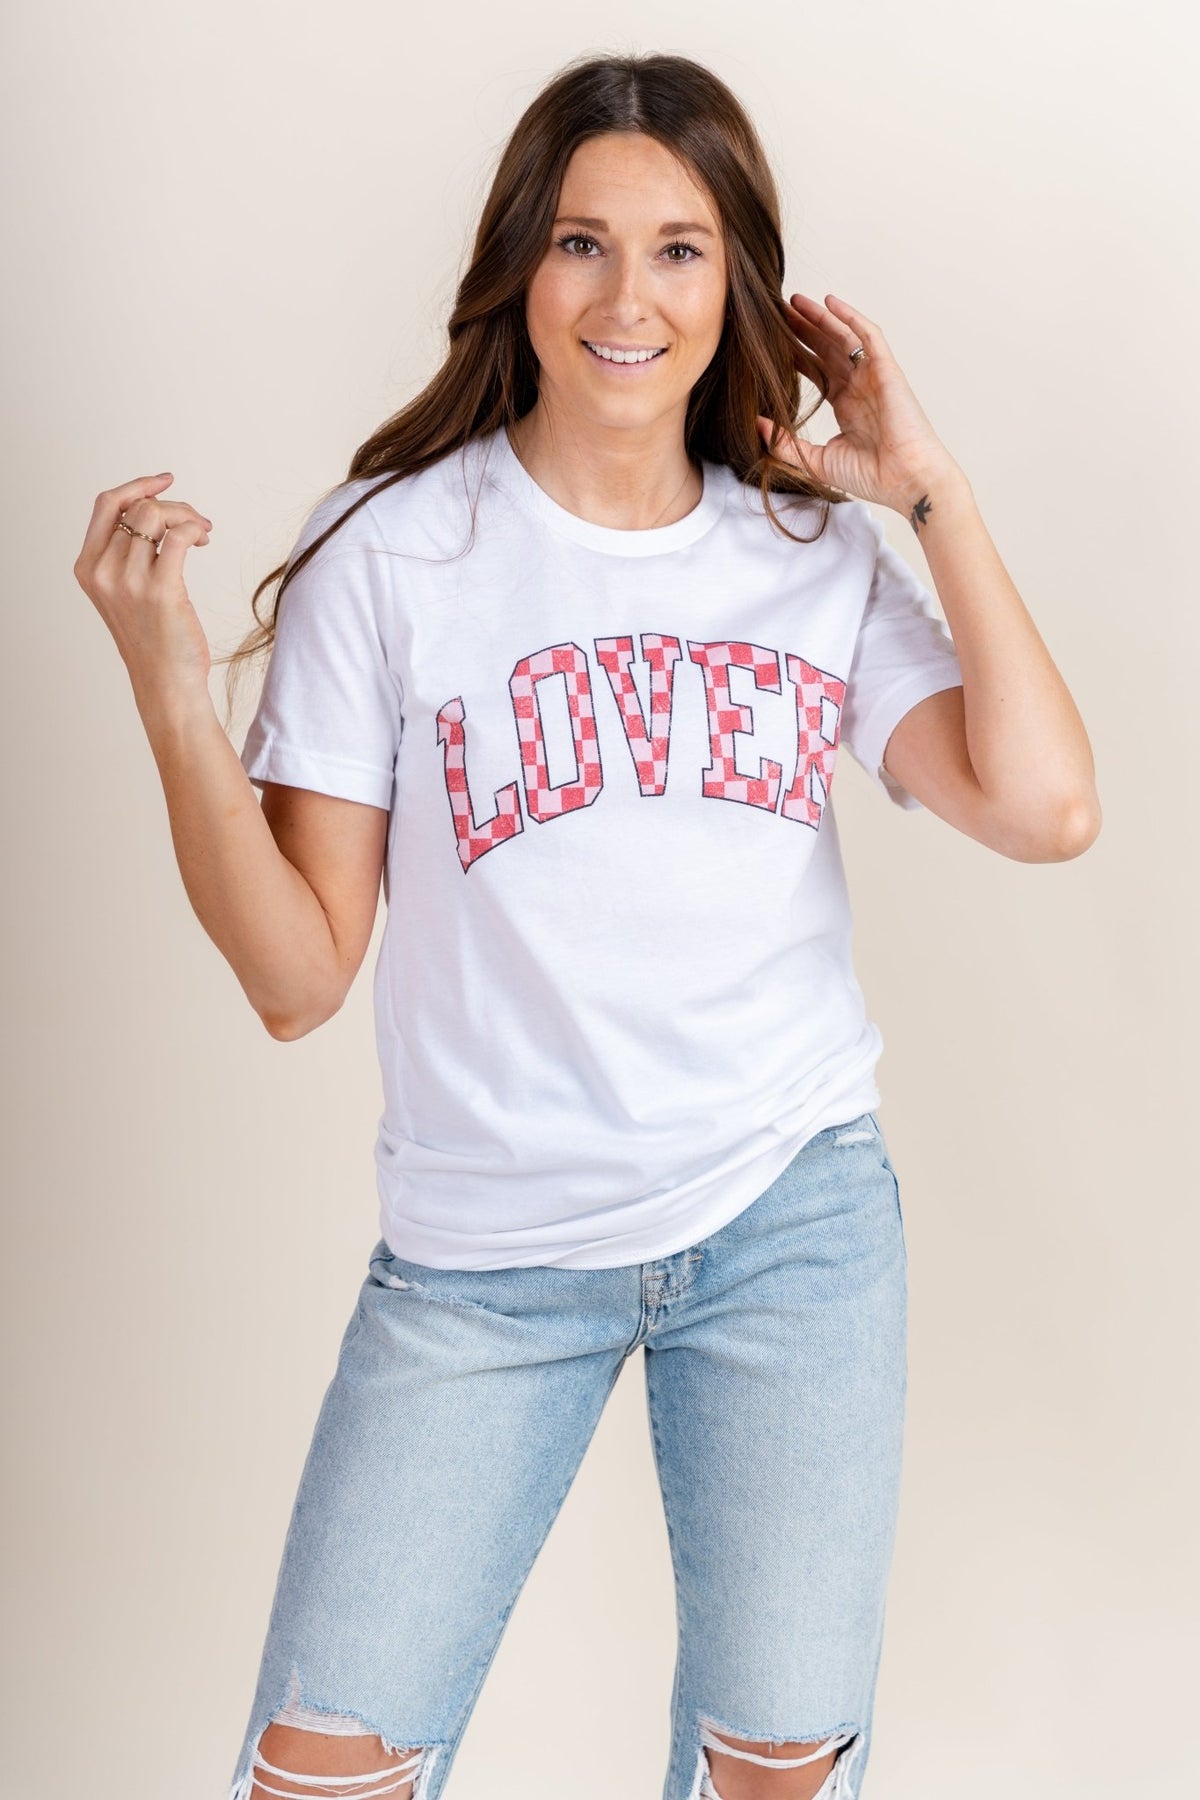 Lover checkered t-shirt white - Cute t-shirt - Trendy Graphic T-Shirts at Lush Fashion Lounge Boutique in Oklahoma City